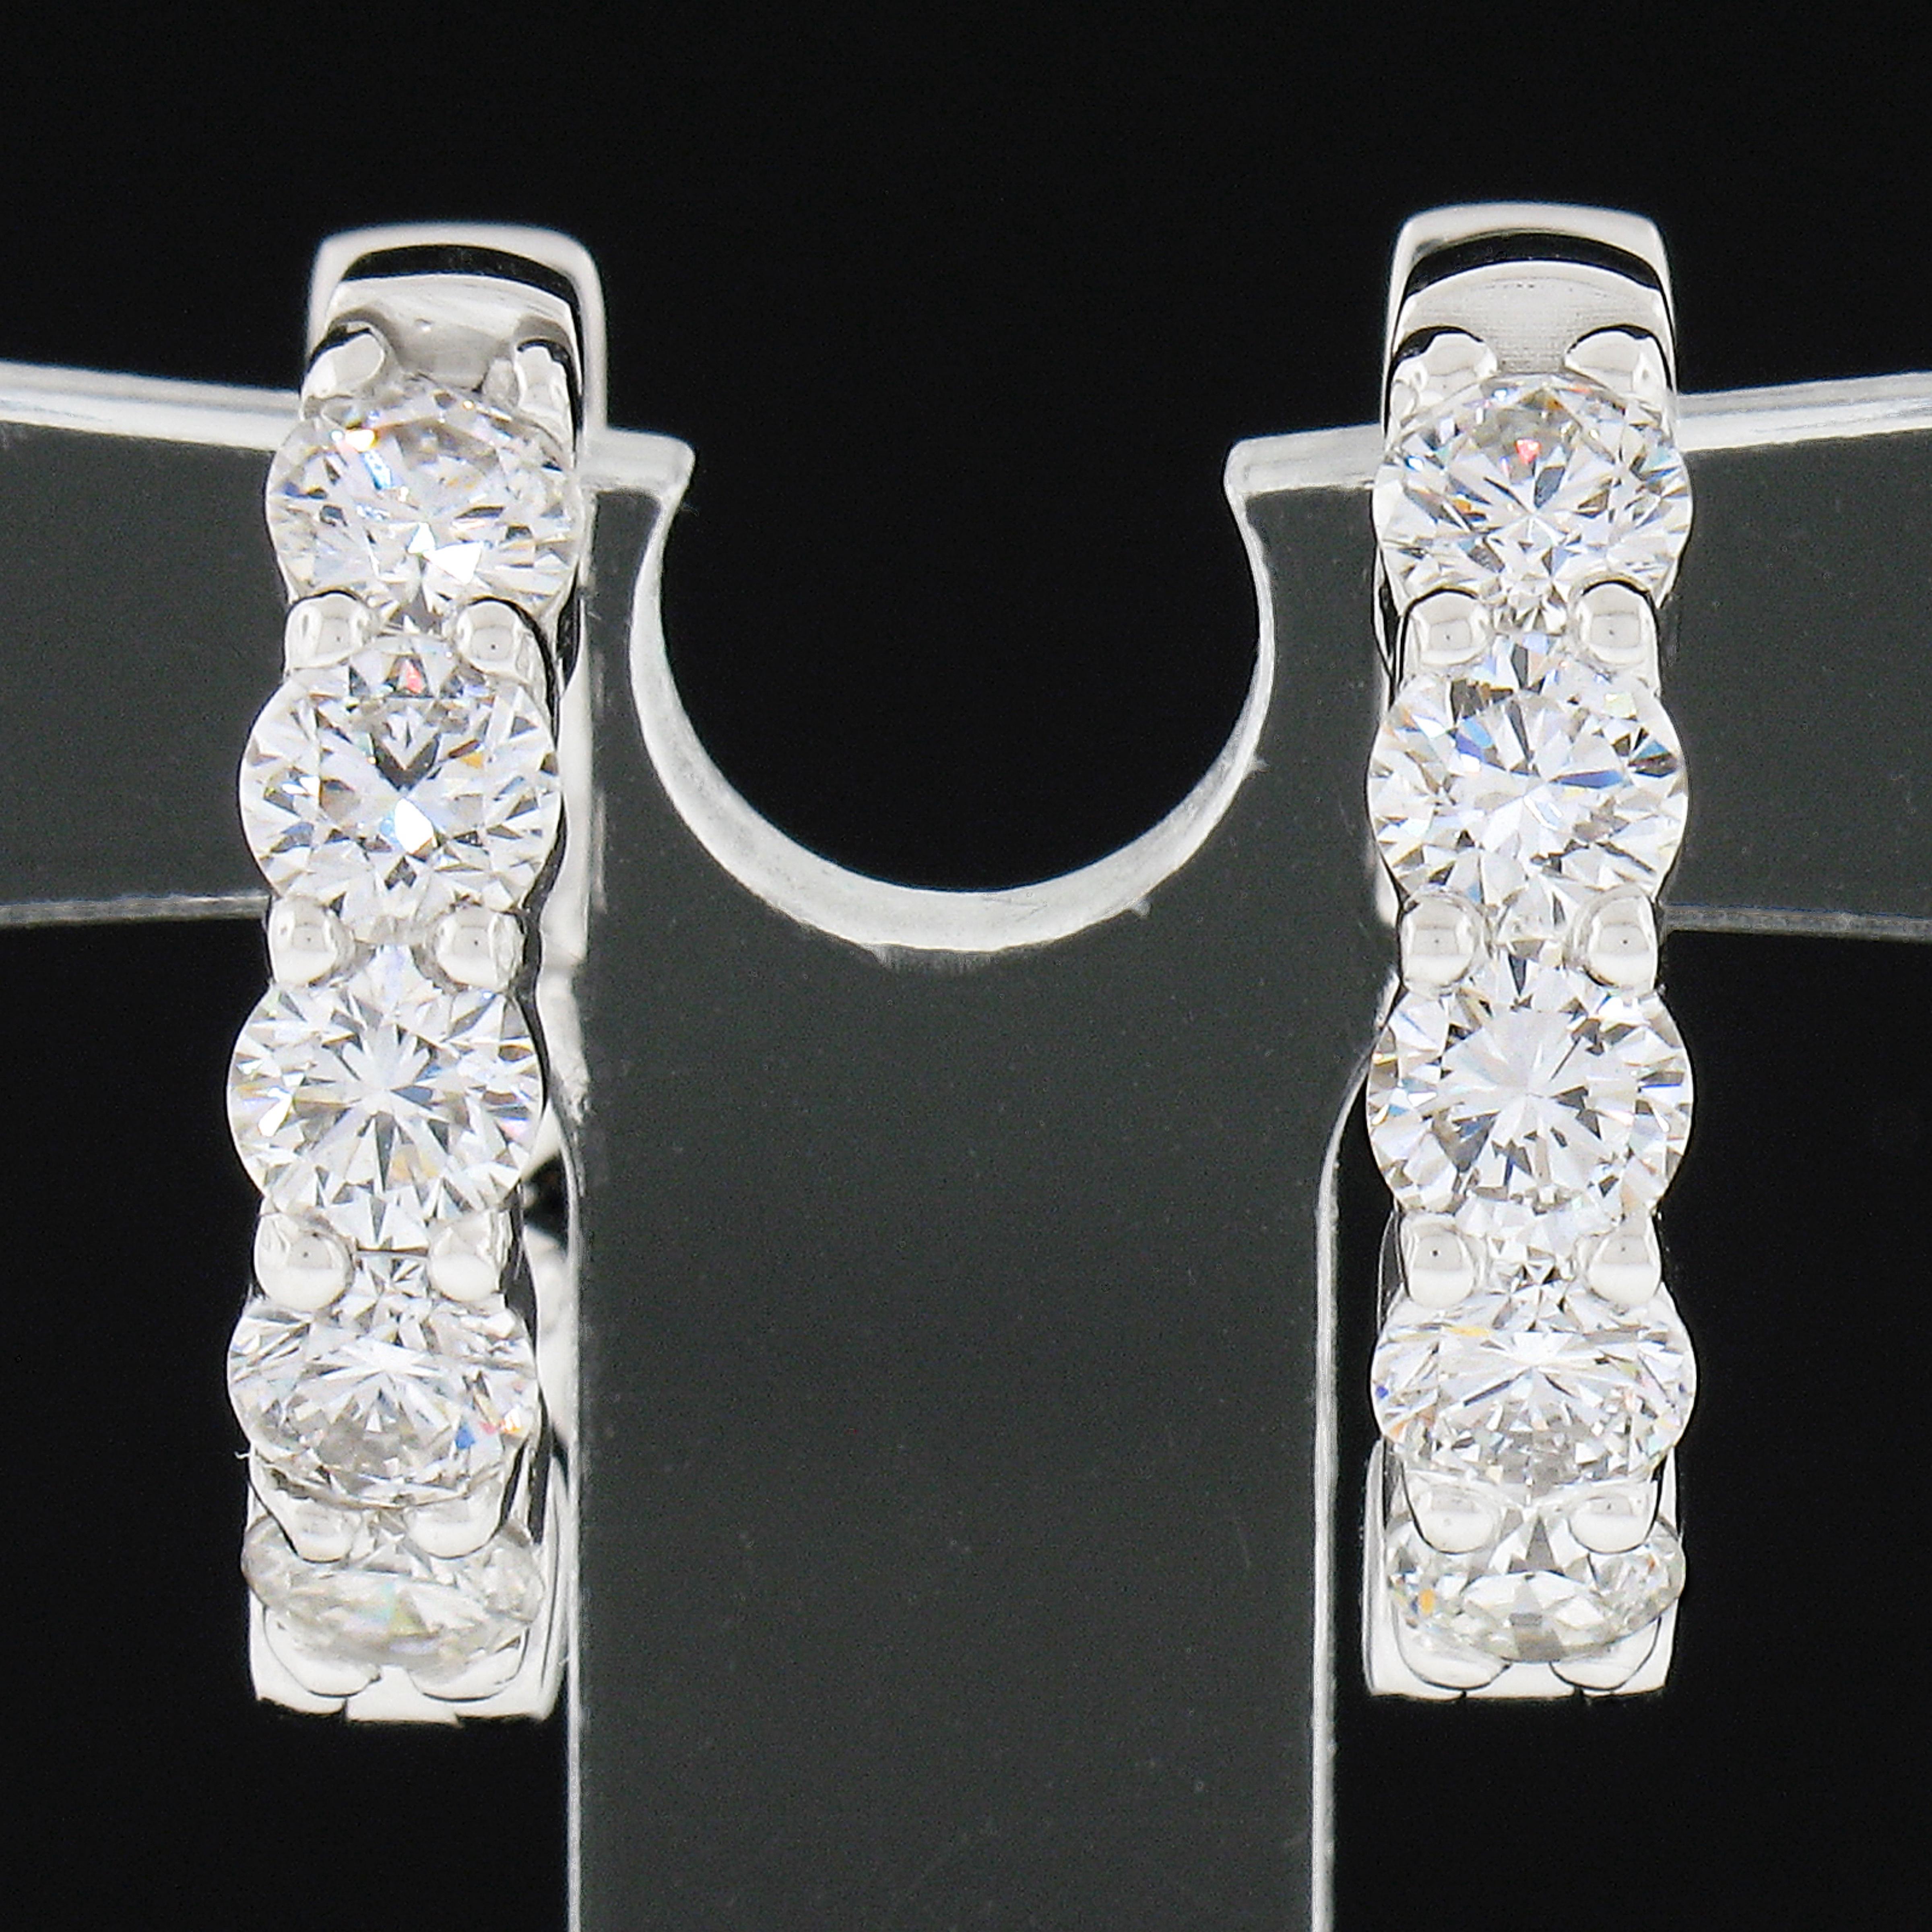 This classic and very well made pair of hoop earrings was newly crafted in solid 14k white gold and features exactly 1.23 carats of round brilliant cut diamonds. These fiery diamonds are neatly shared-prong set across the front side in sets of 5,